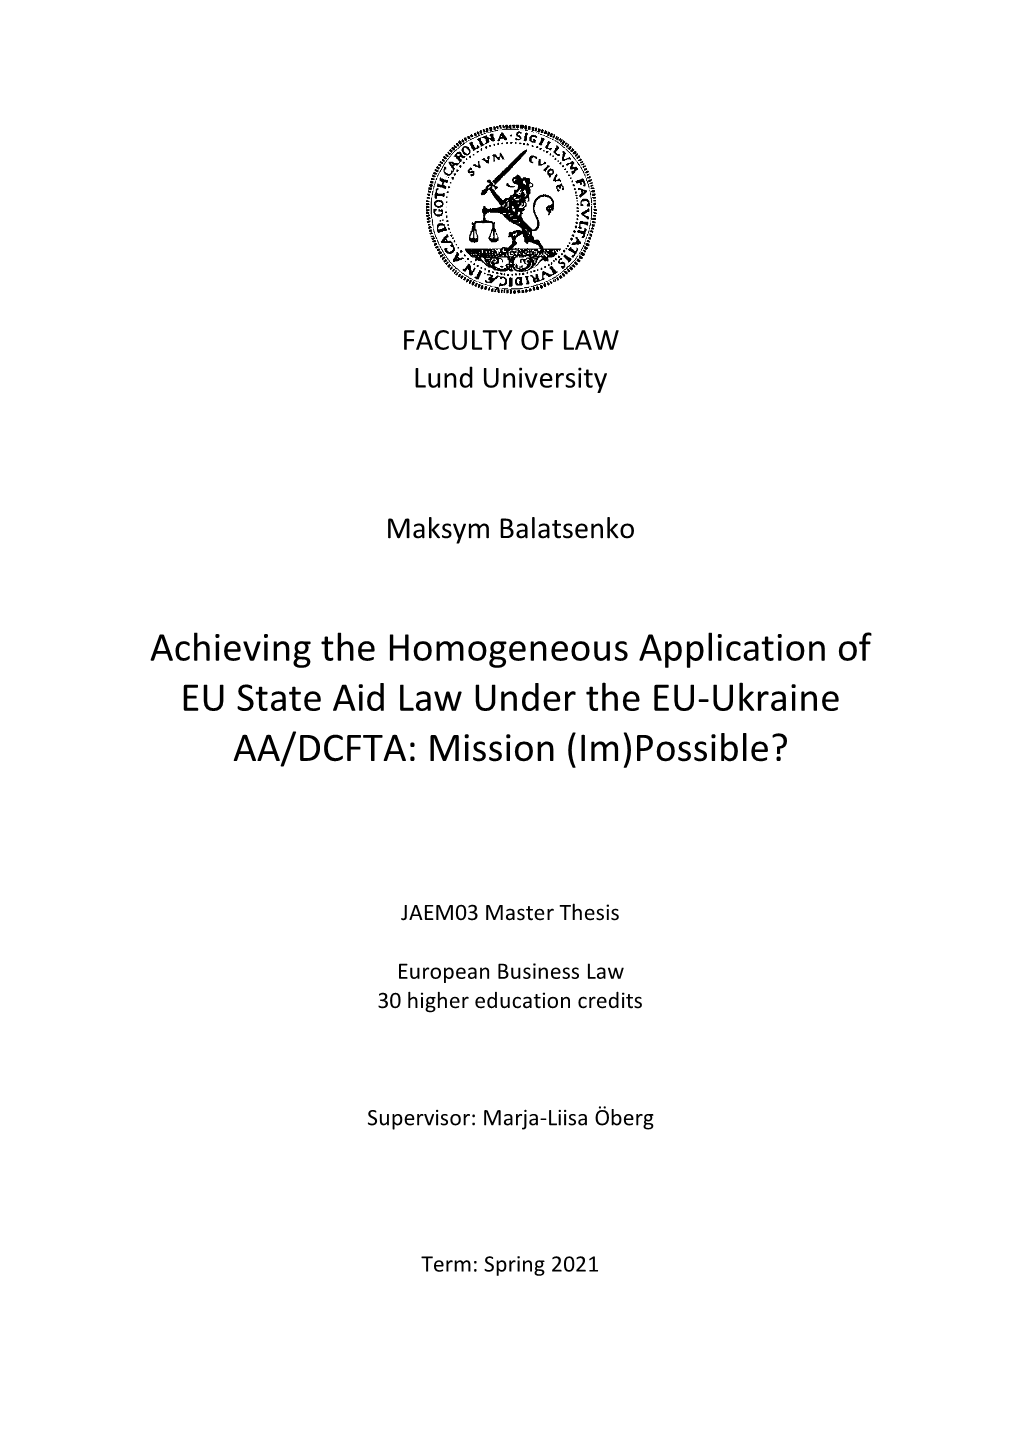 Achieving the Homogeneous Application of EU State Aid Law Under the EU-Ukraine AA/DCFTA: Mission (Im)Possible?